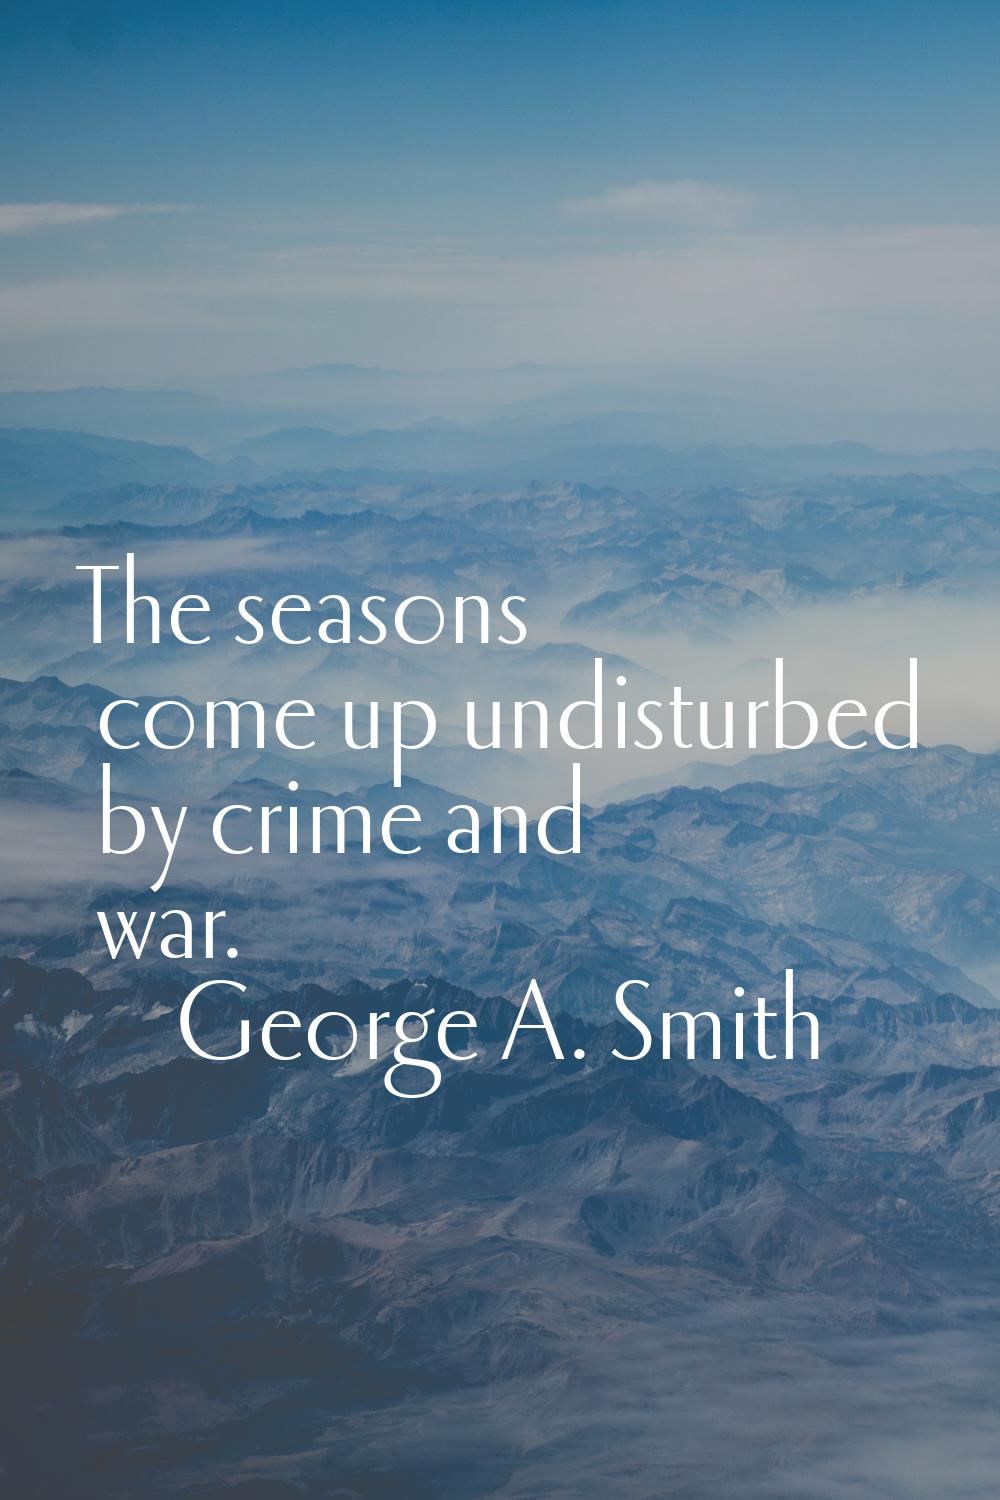 The seasons come up undisturbed by crime and war.